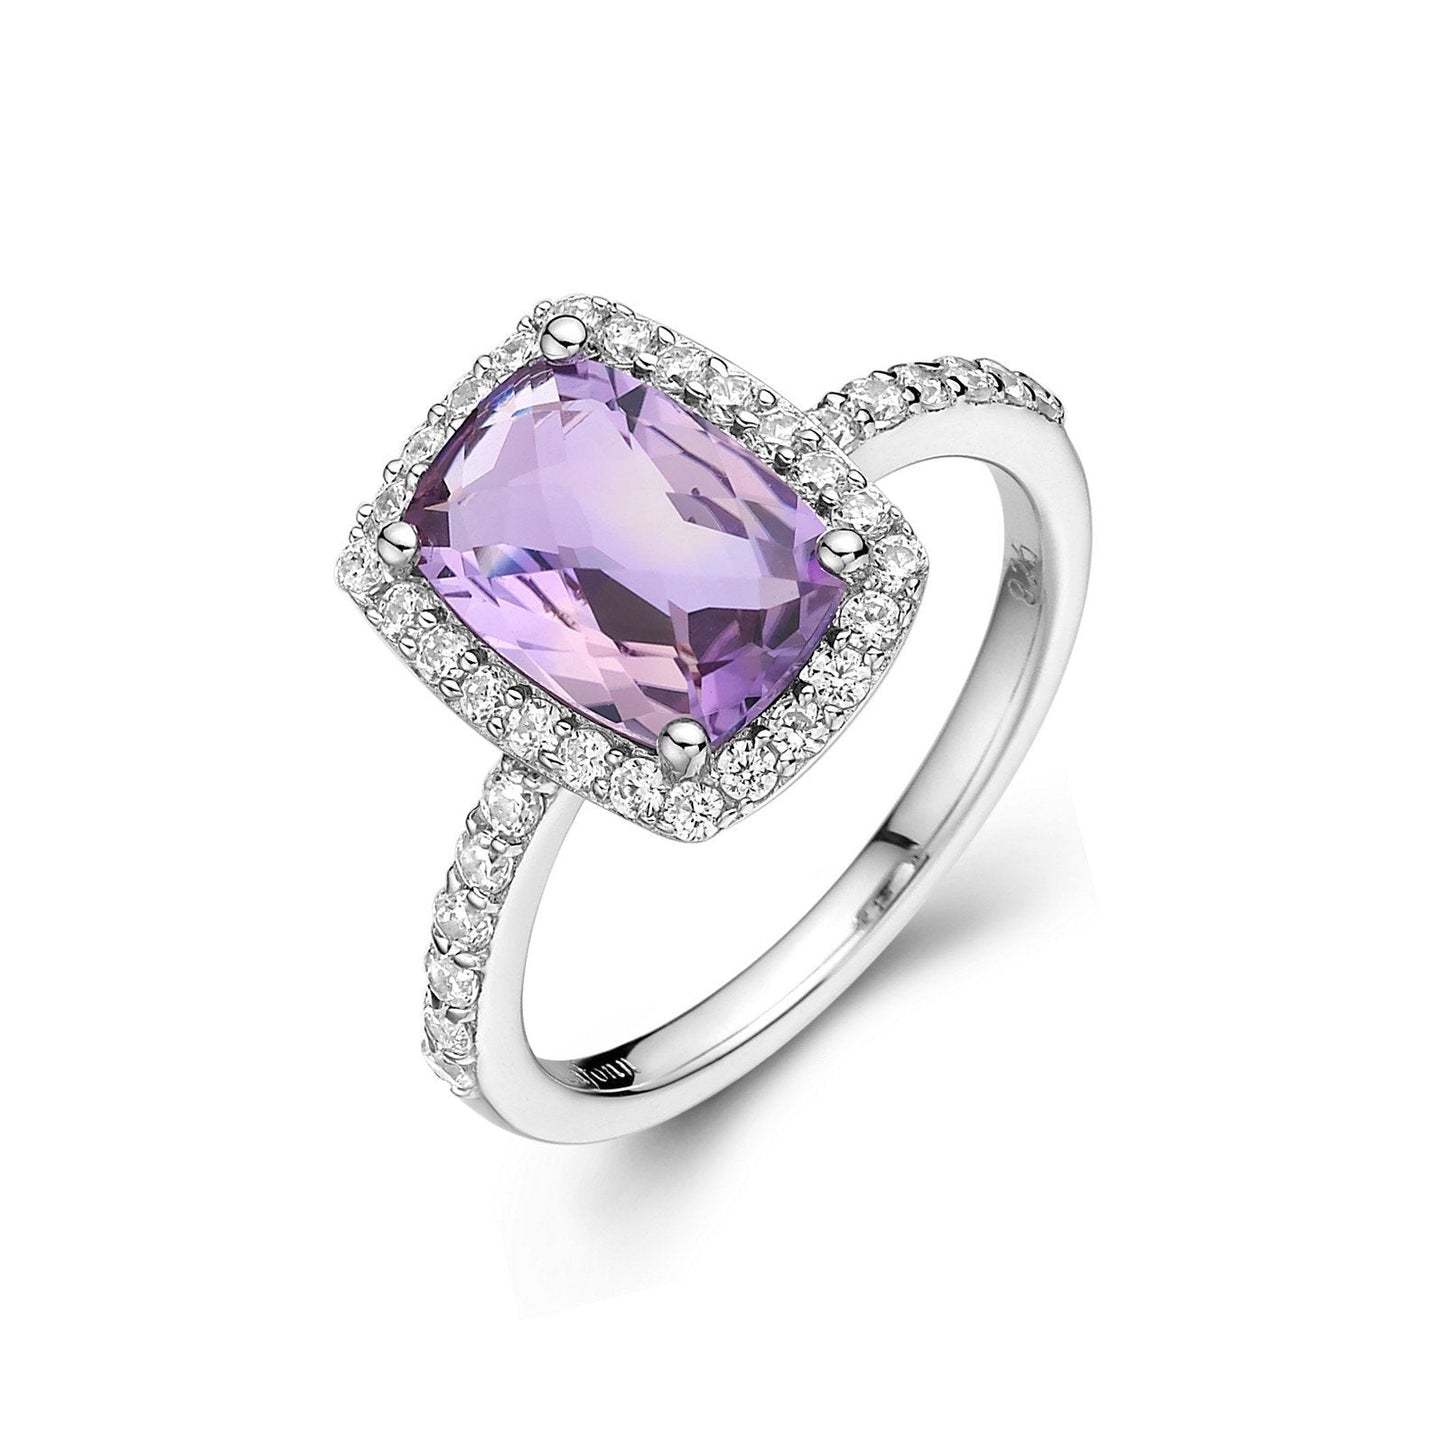 Load image into Gallery viewer, Lafonn Genuine Amethyst Halo Ring Amethyst RINGS Size 5 Platinum Appx CTW: 3.73 cts. Amethyst: Appx 3.21 cts.  Lassaire simulated diamonds: 0.52 cts. CTS 
